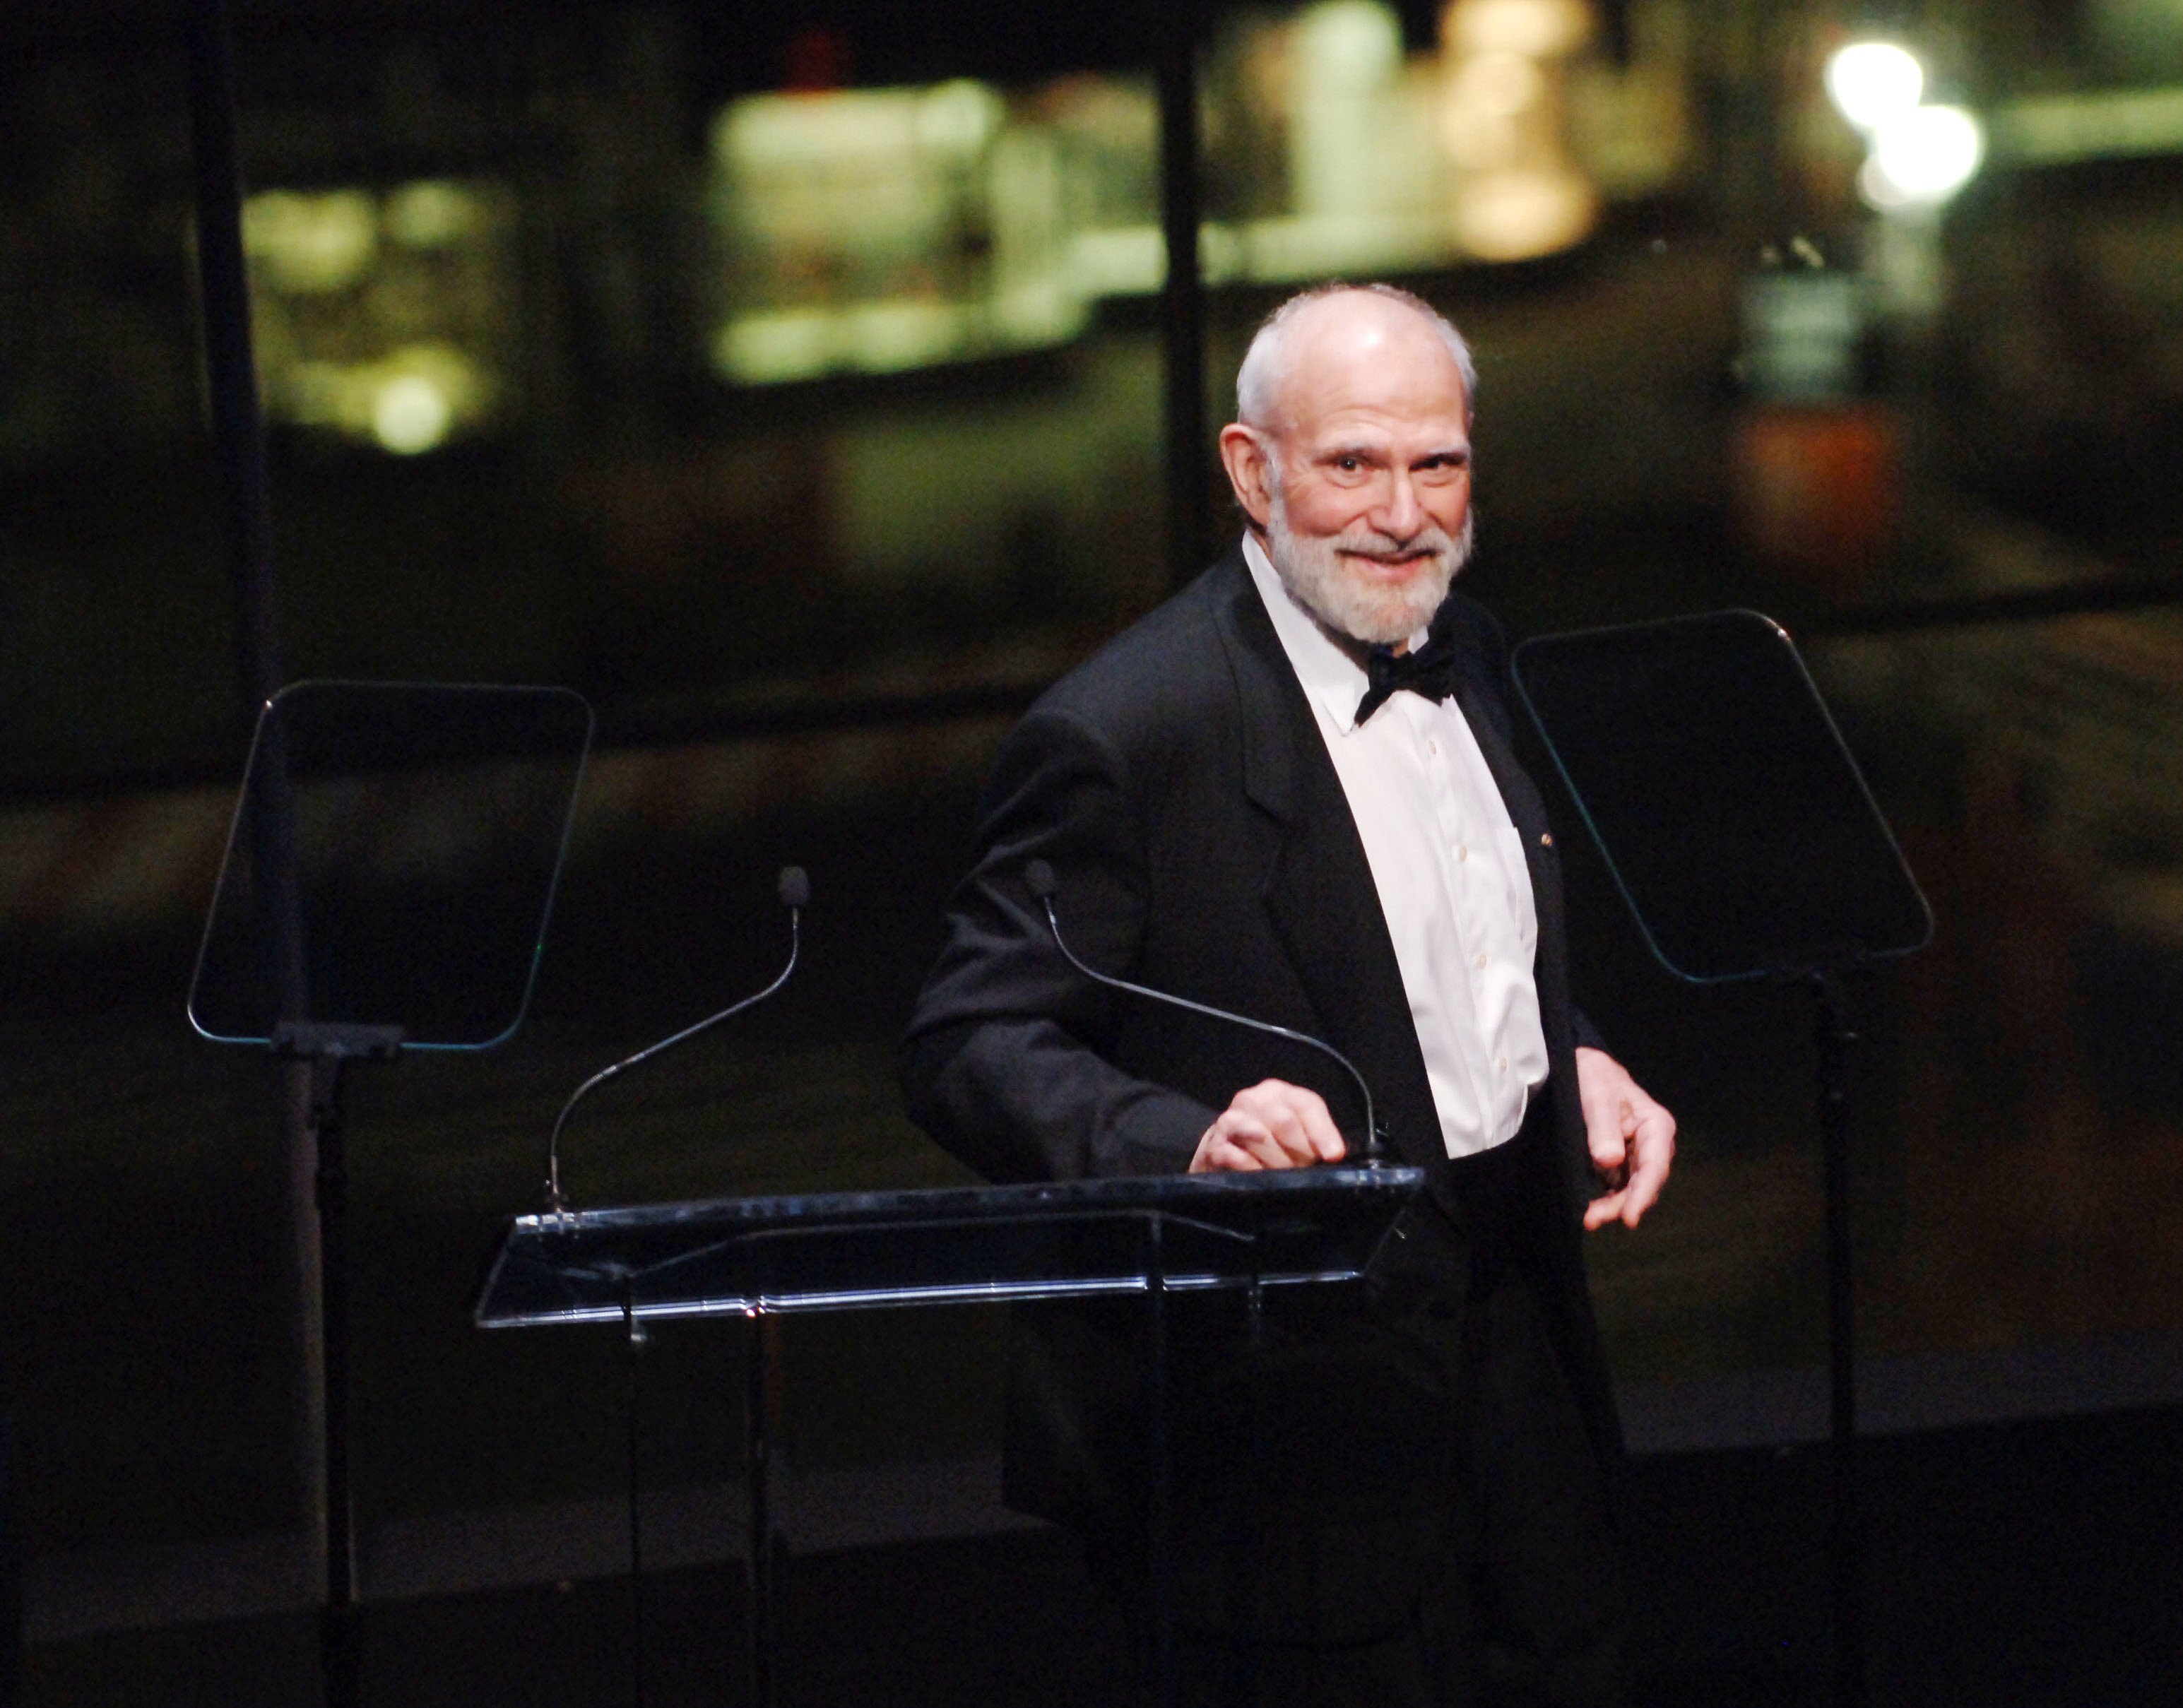 Dr. Oliver Sacks speaks at the Music Has Power Awards Benefit in the Allen Room at the Frederick P. Rose Hall, Home of Jazz at Lincoln Center on Nov. 6, 2006 in New York City. (Brad Barket—Getty Images)